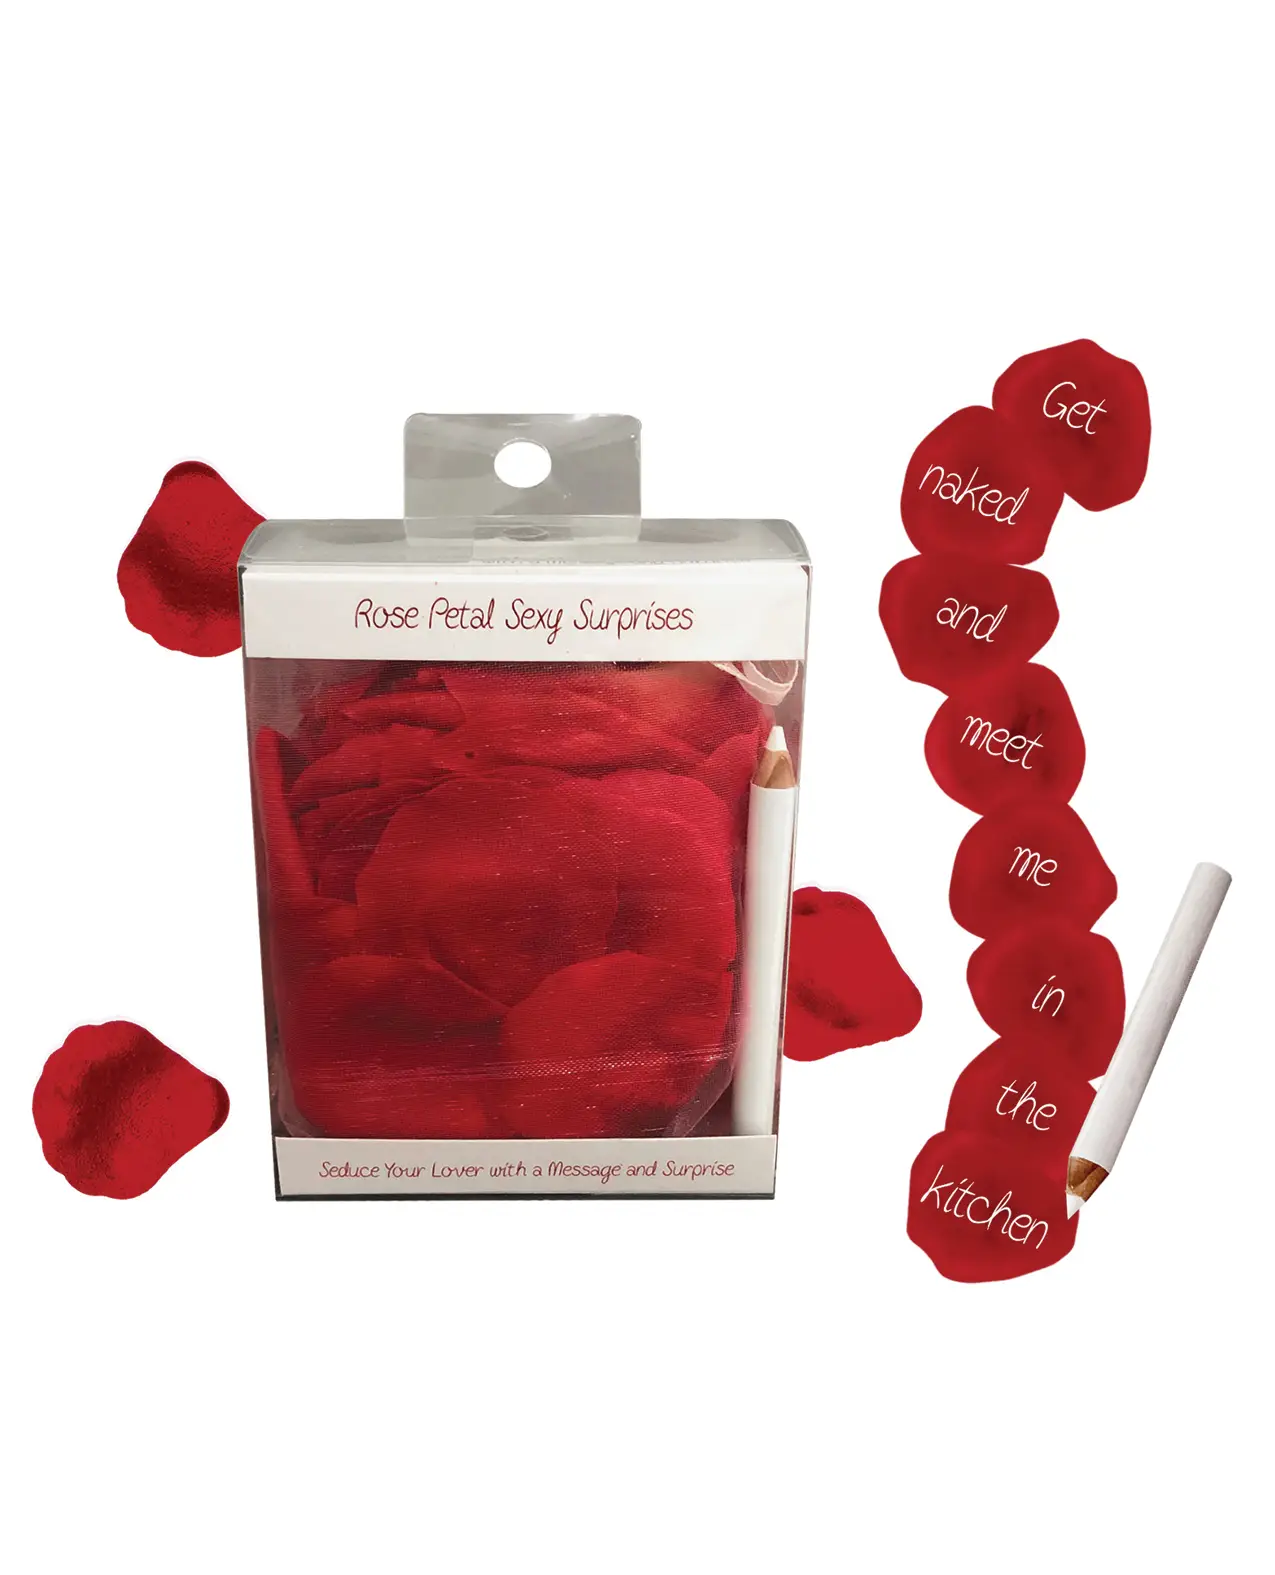 Box with 100 fake rose petals with white pencil to write sexy messages